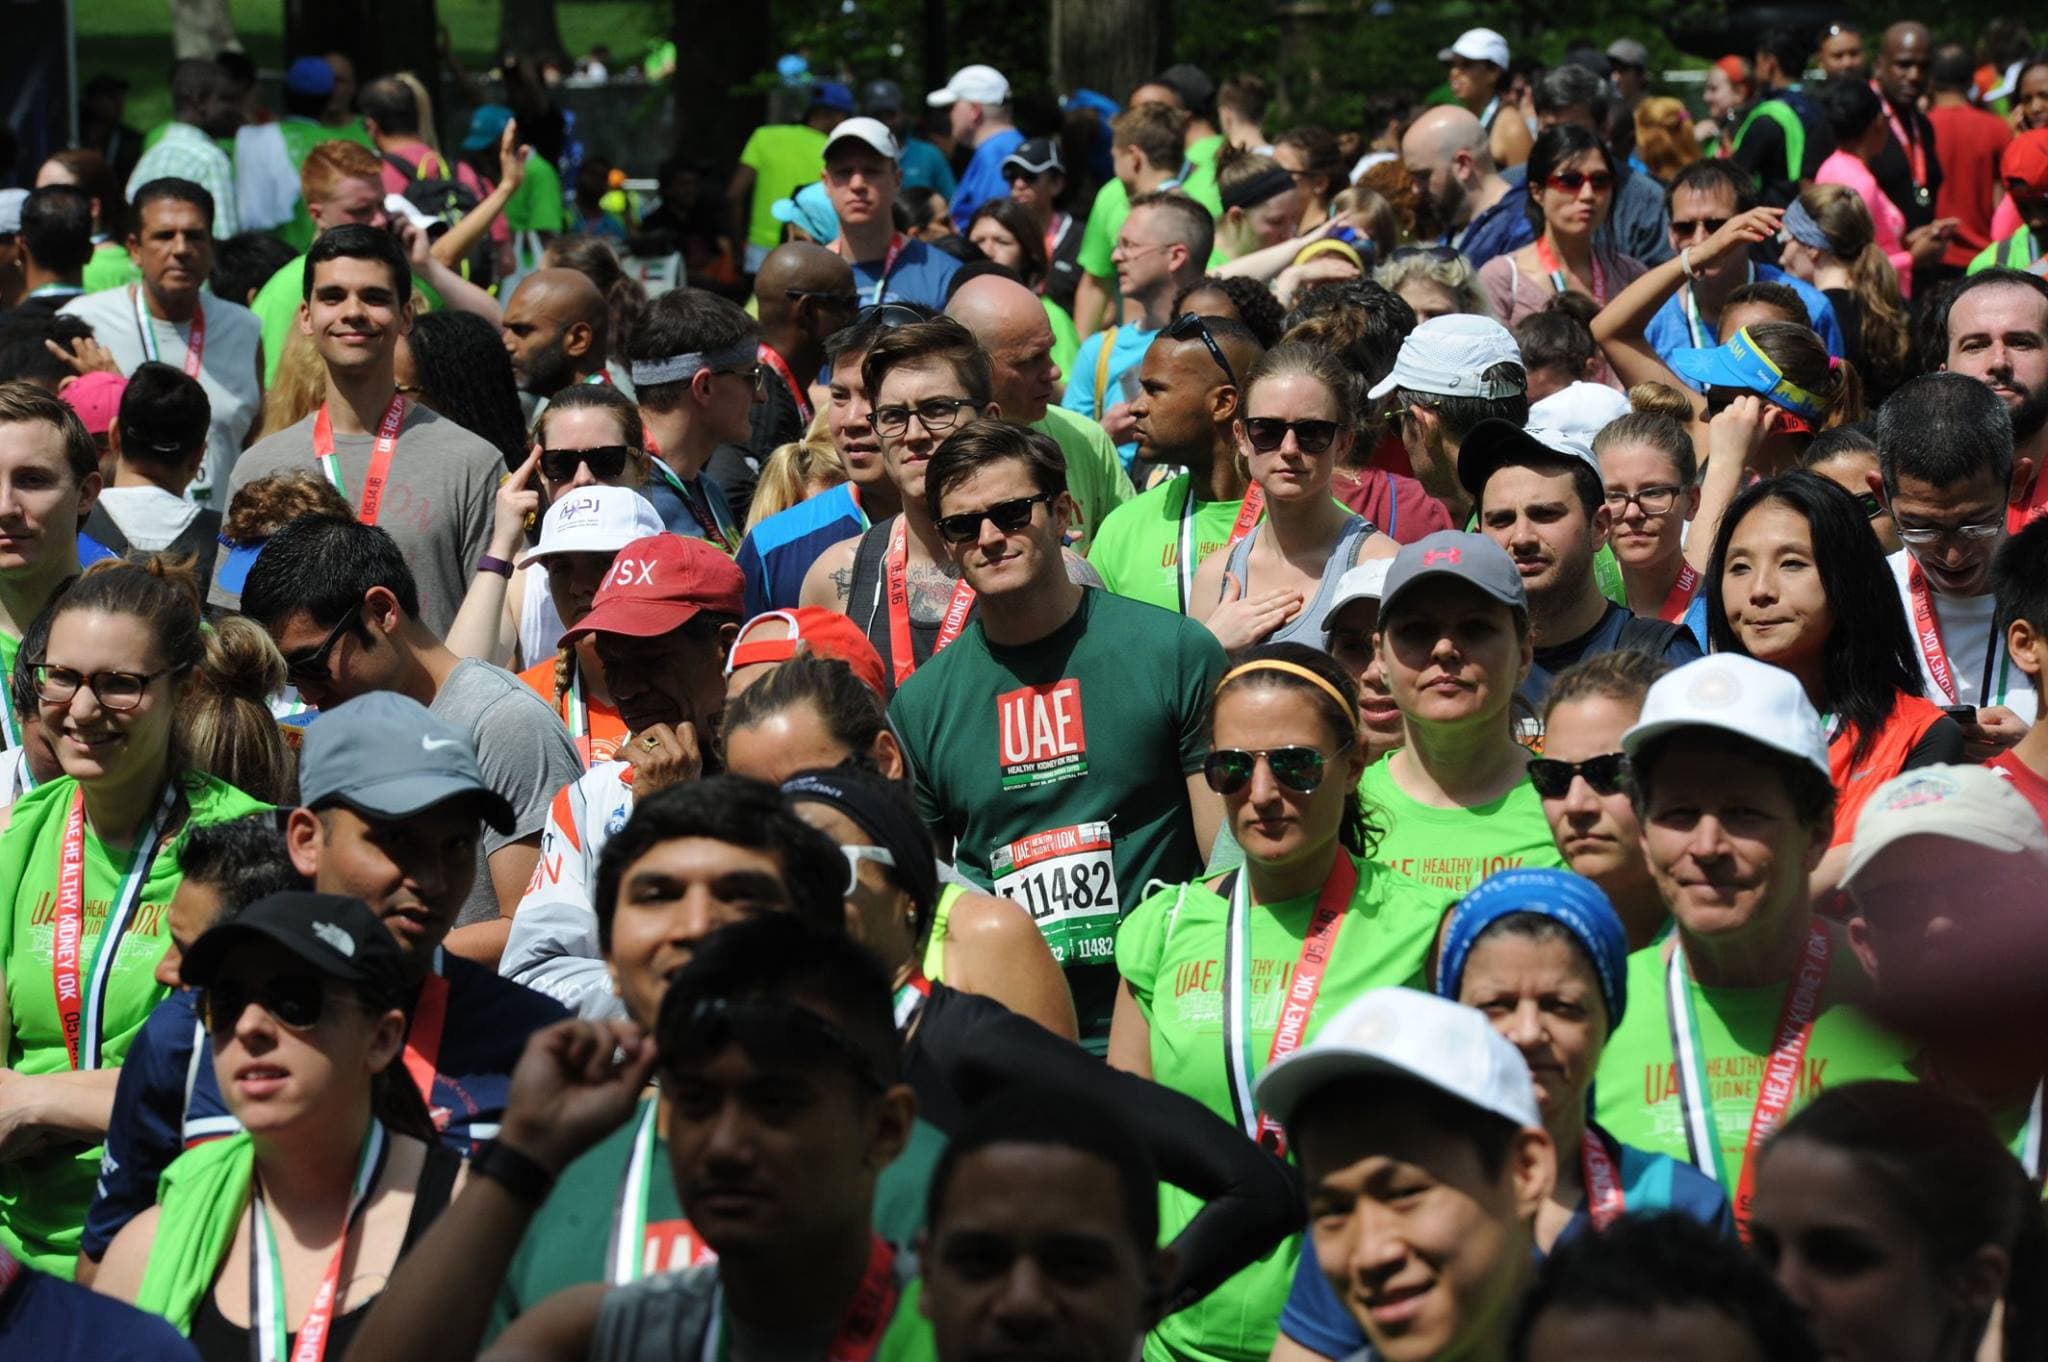 Thank you to all of our partners, friends, #UAE students and thousands of participants who came out last weekend to help make the 2016 #UAEHK10K successful in benefitting the National Kidney Foundation Inc and raising awareness for #kidneydisease. #UAEUSA